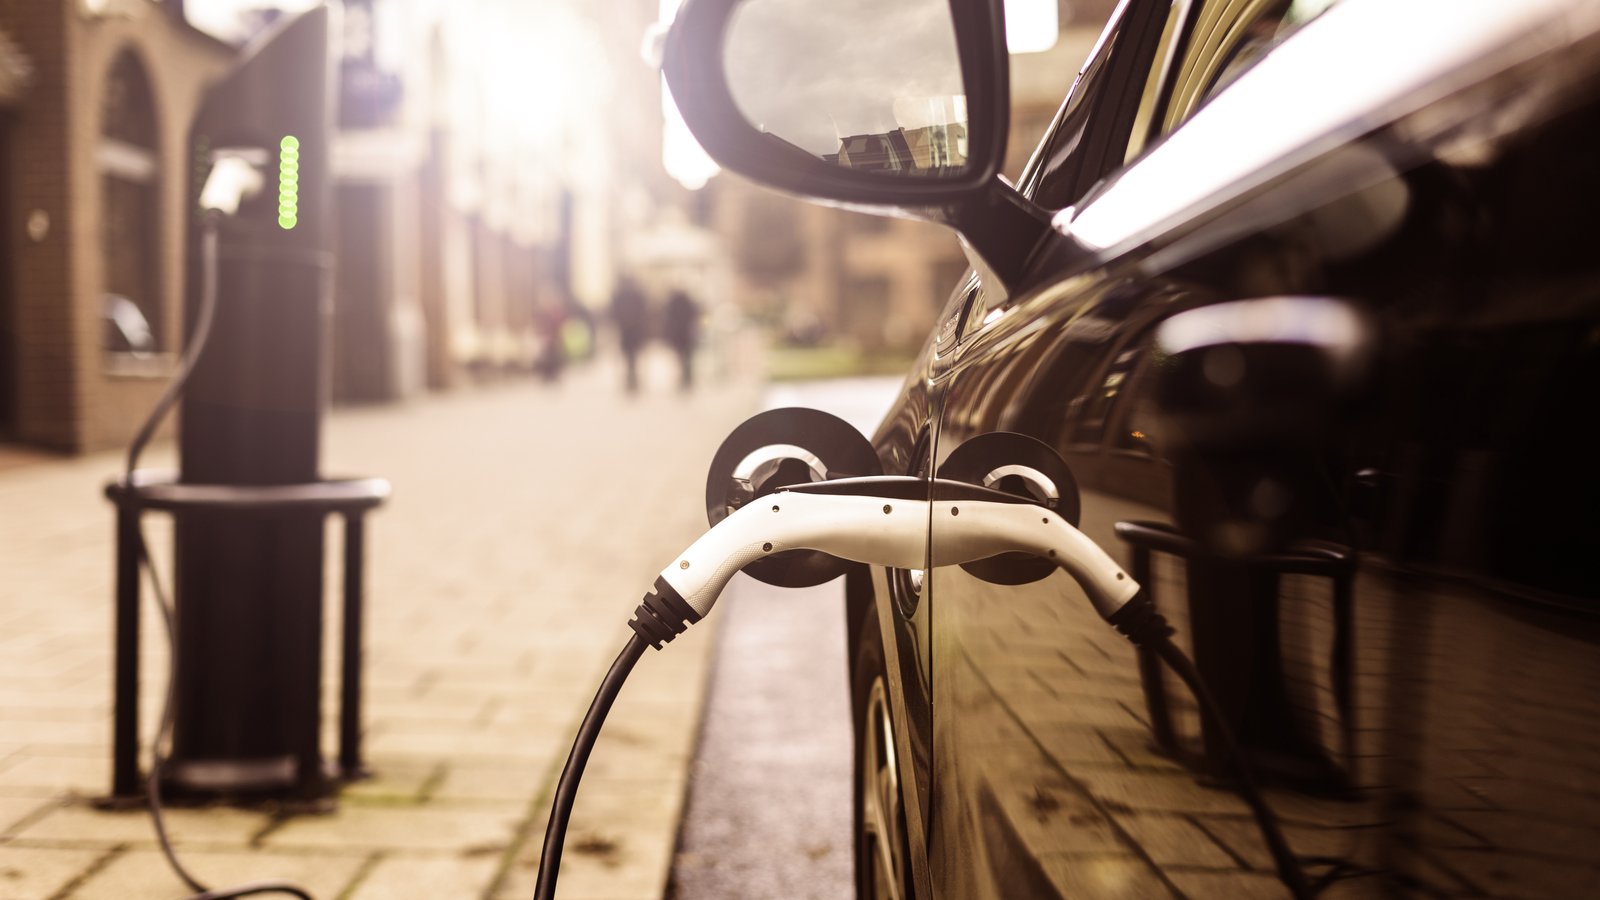 7 Electric Vehicle Stocks to Sell Before They Crash and Burn